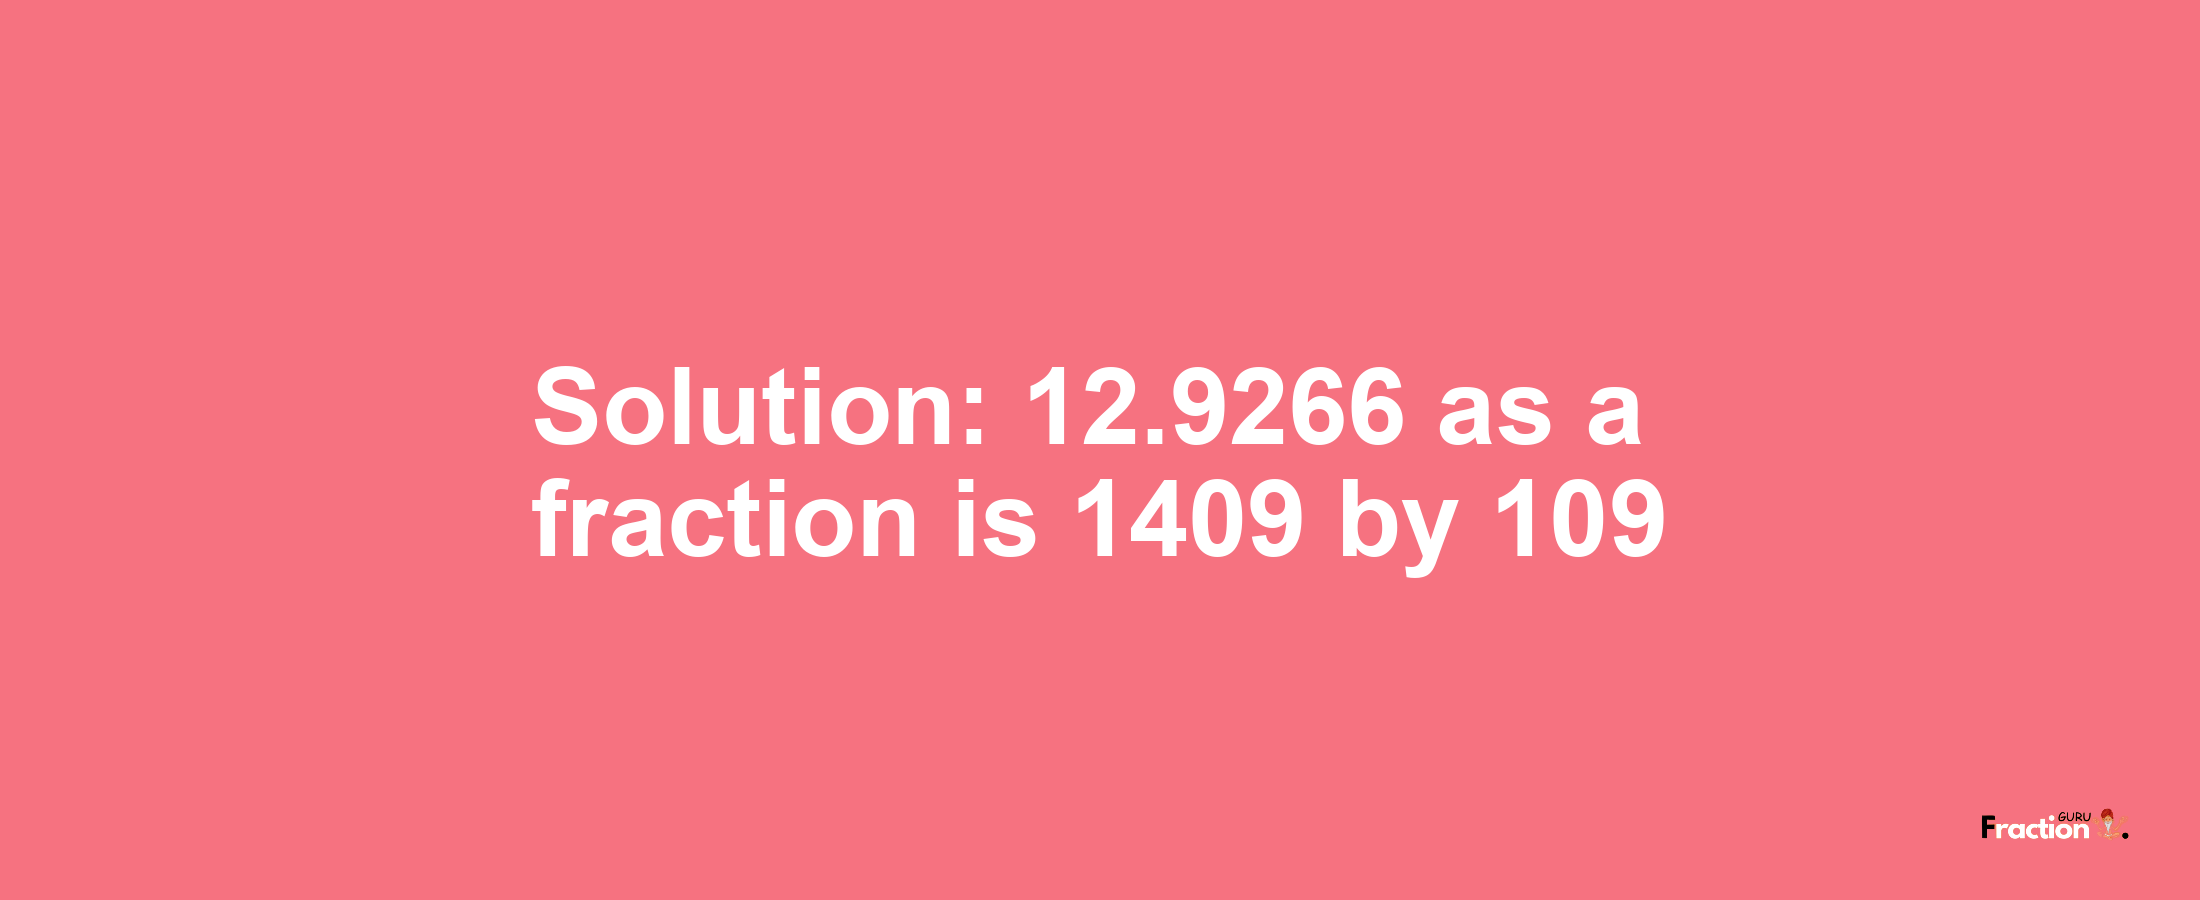 Solution:12.9266 as a fraction is 1409/109